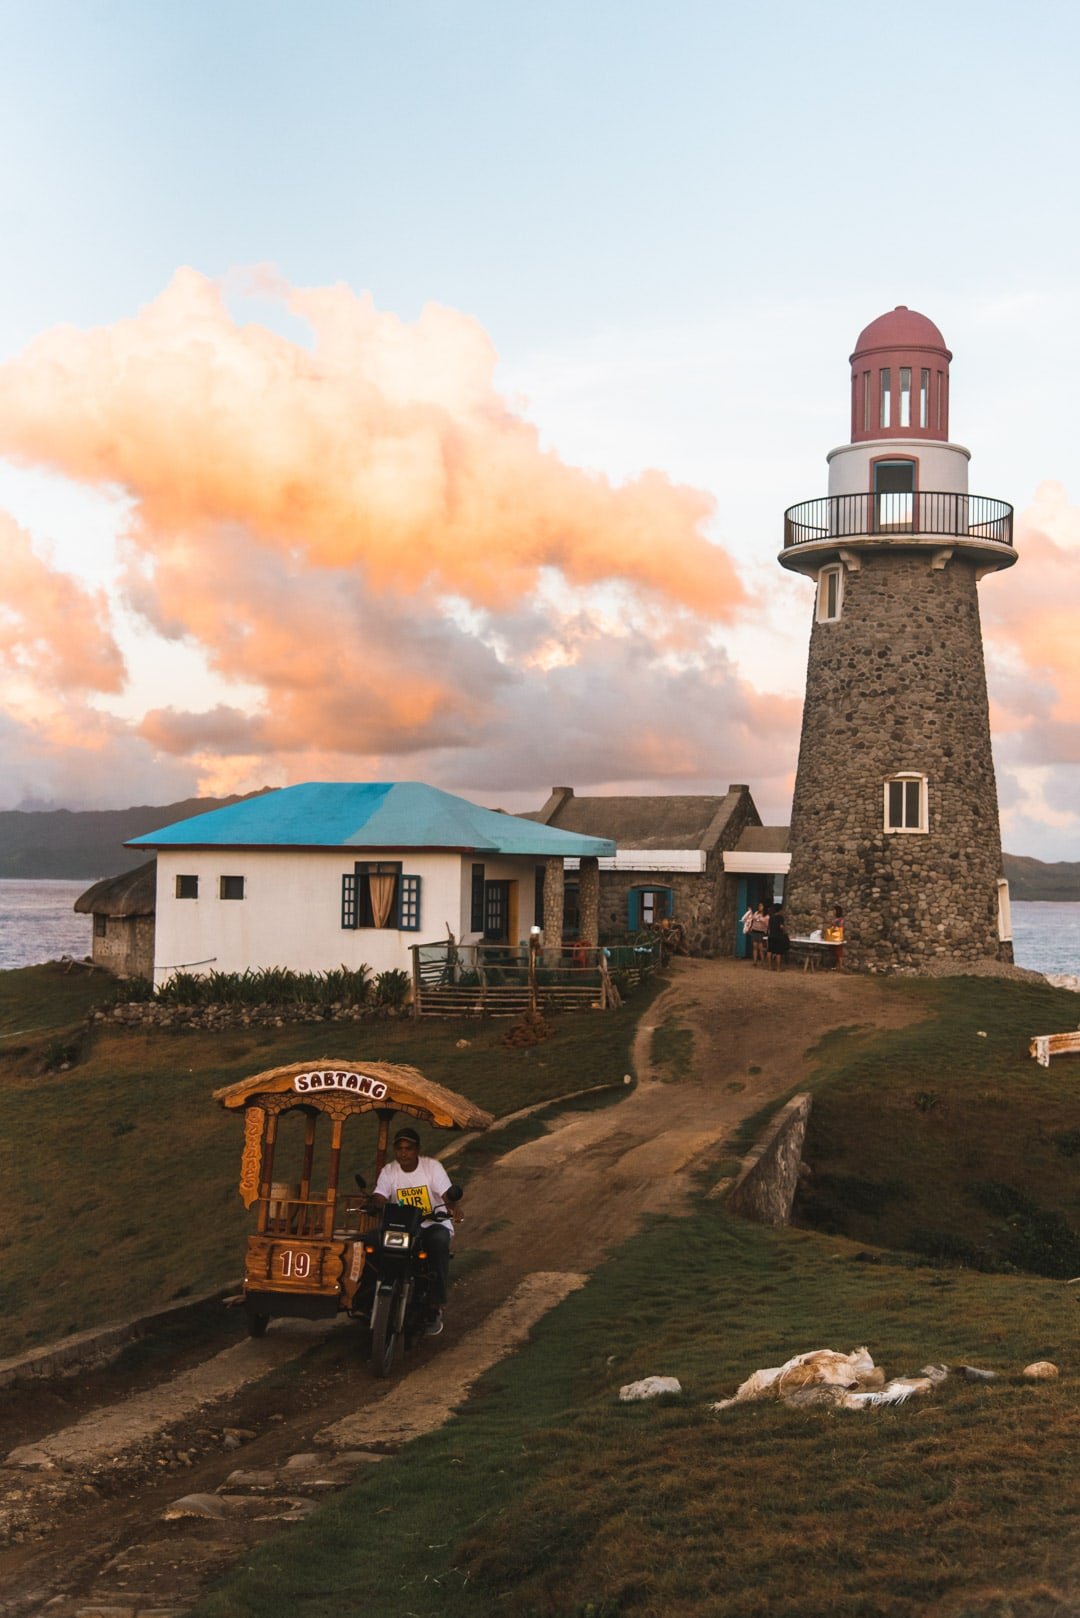 Things to do in Batanes, Transportation around Batanes, Batanes tourist spots, atms in batanes, wifi connection in batanes, how to go to Batanes, Sabtang lighthouse